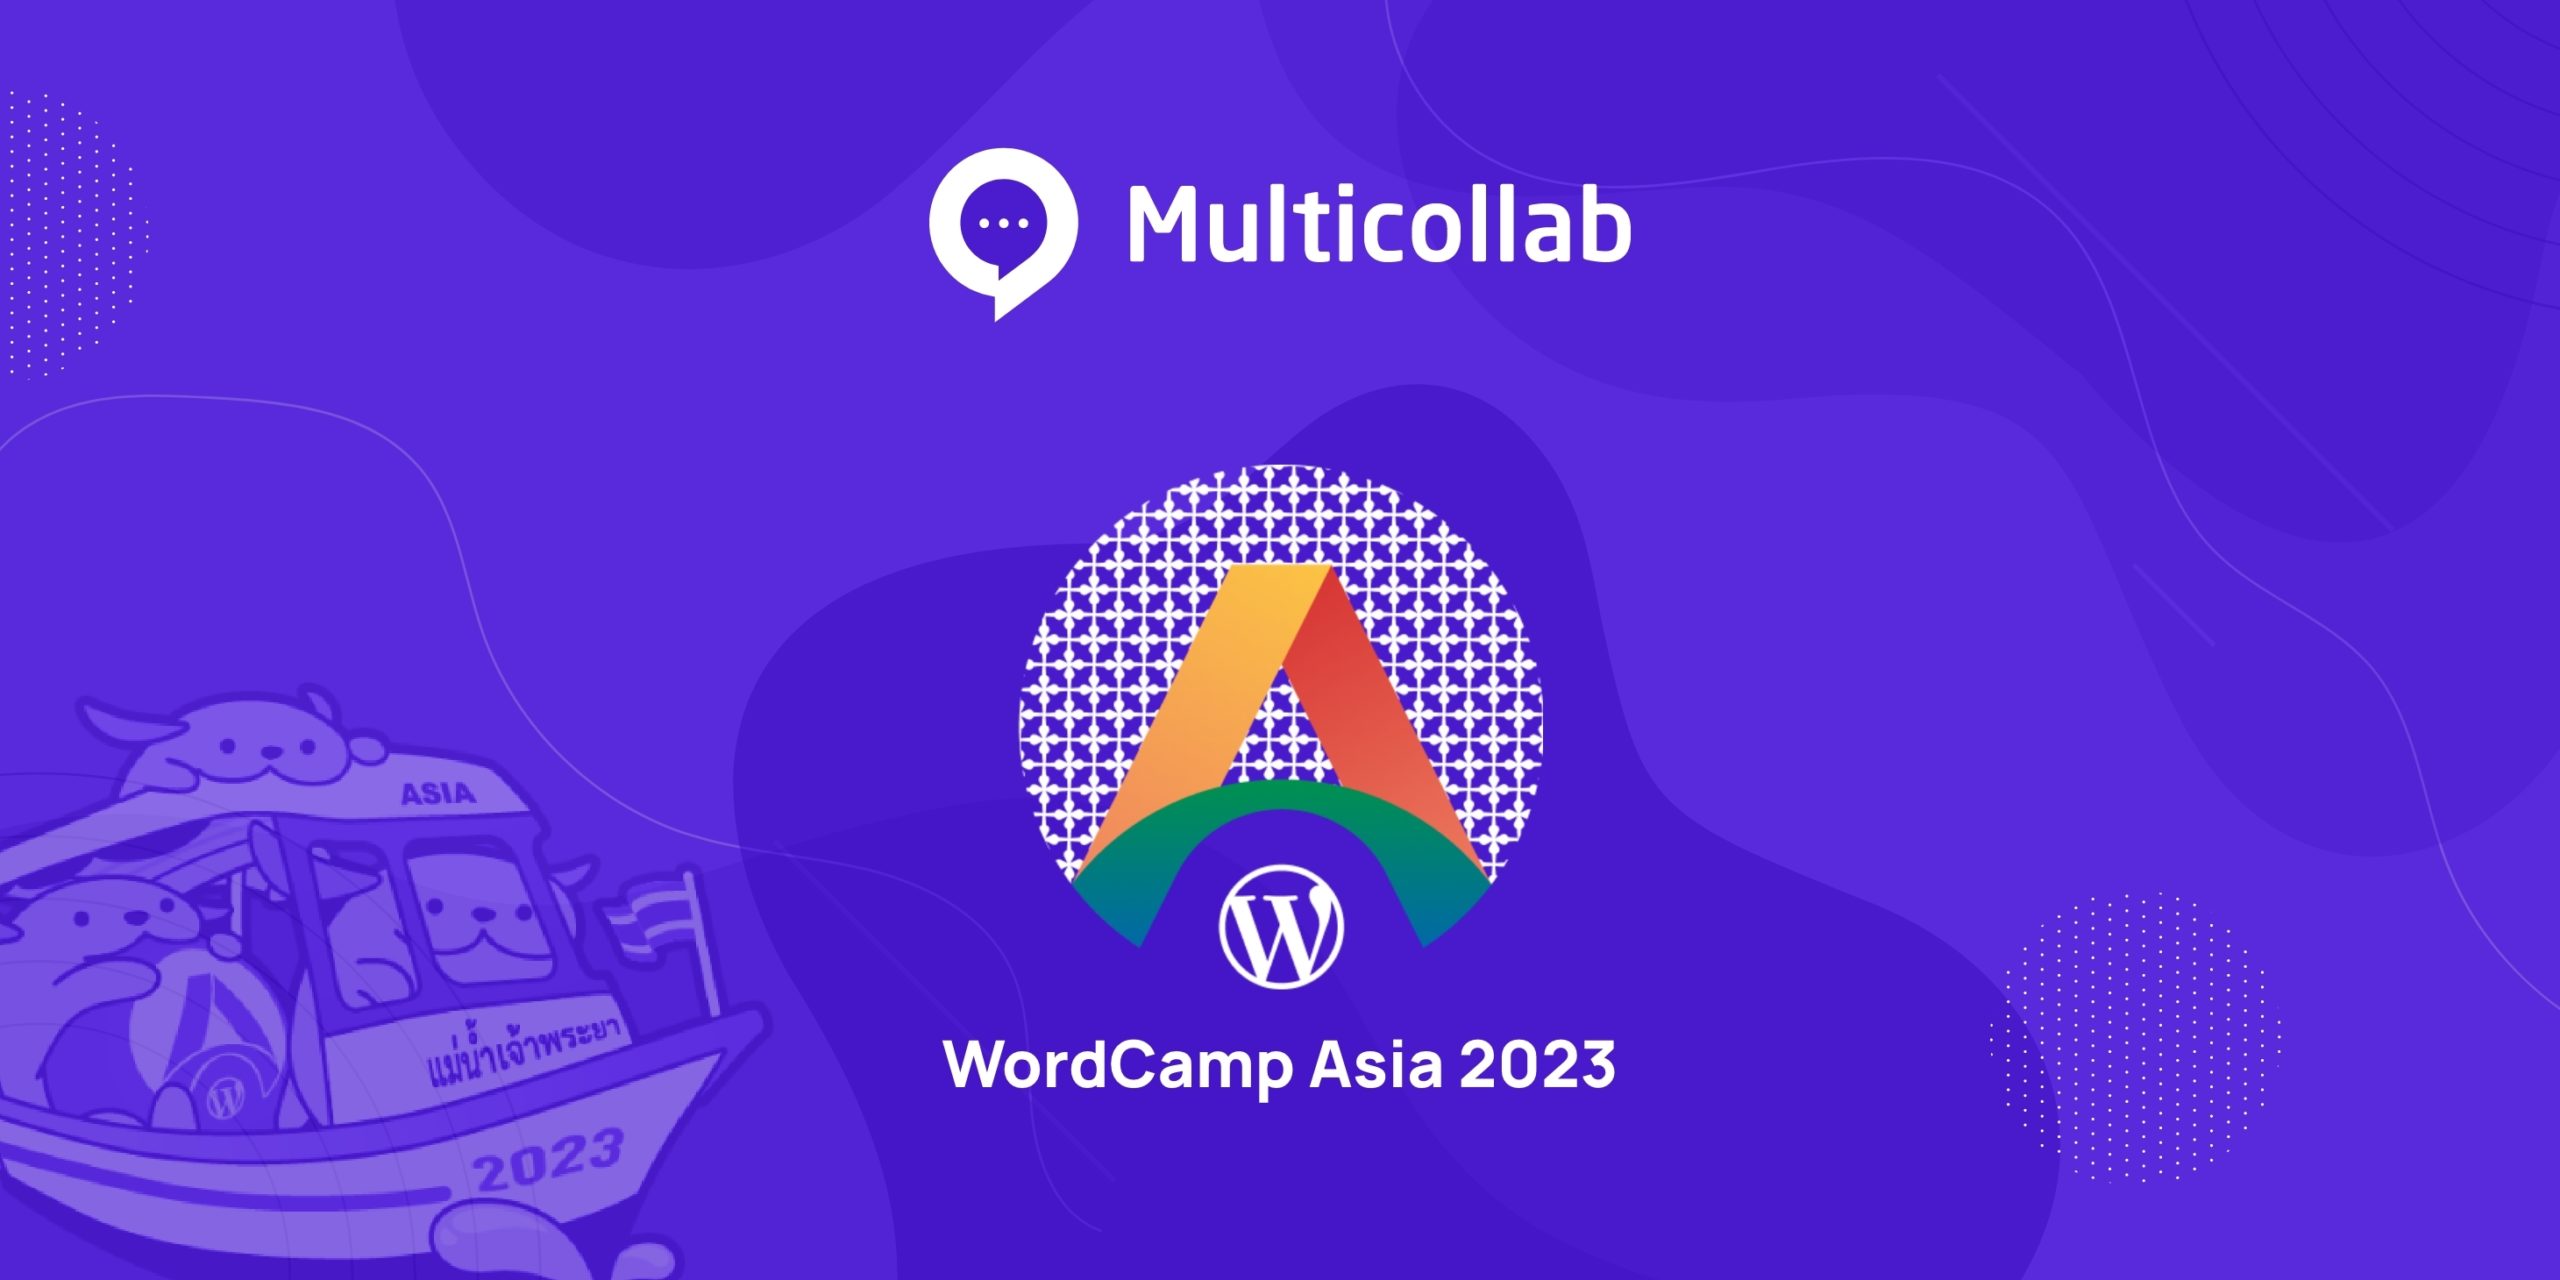 multicollab-in-the-land-of-smiles-wc-asia-2023-banner-image